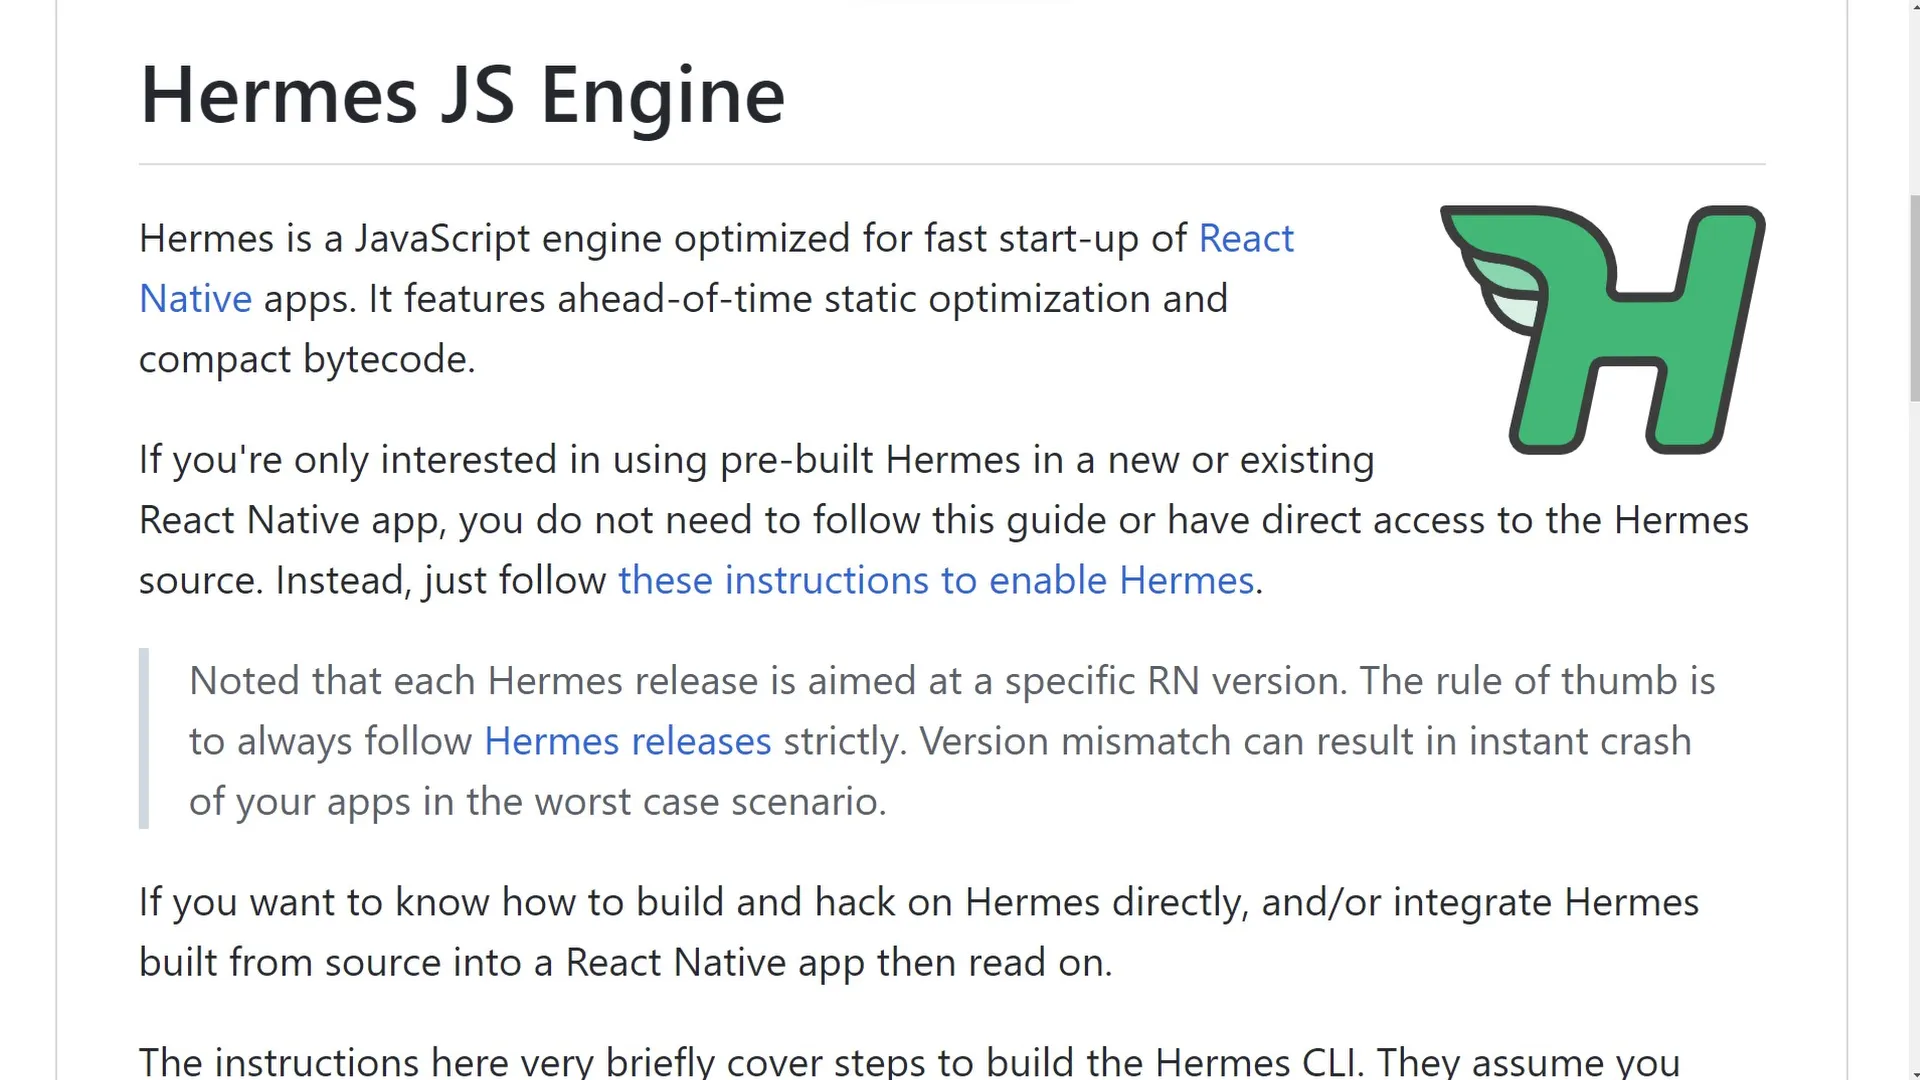 facebook/hermes: A JavaScript engine optimized for running React Native.